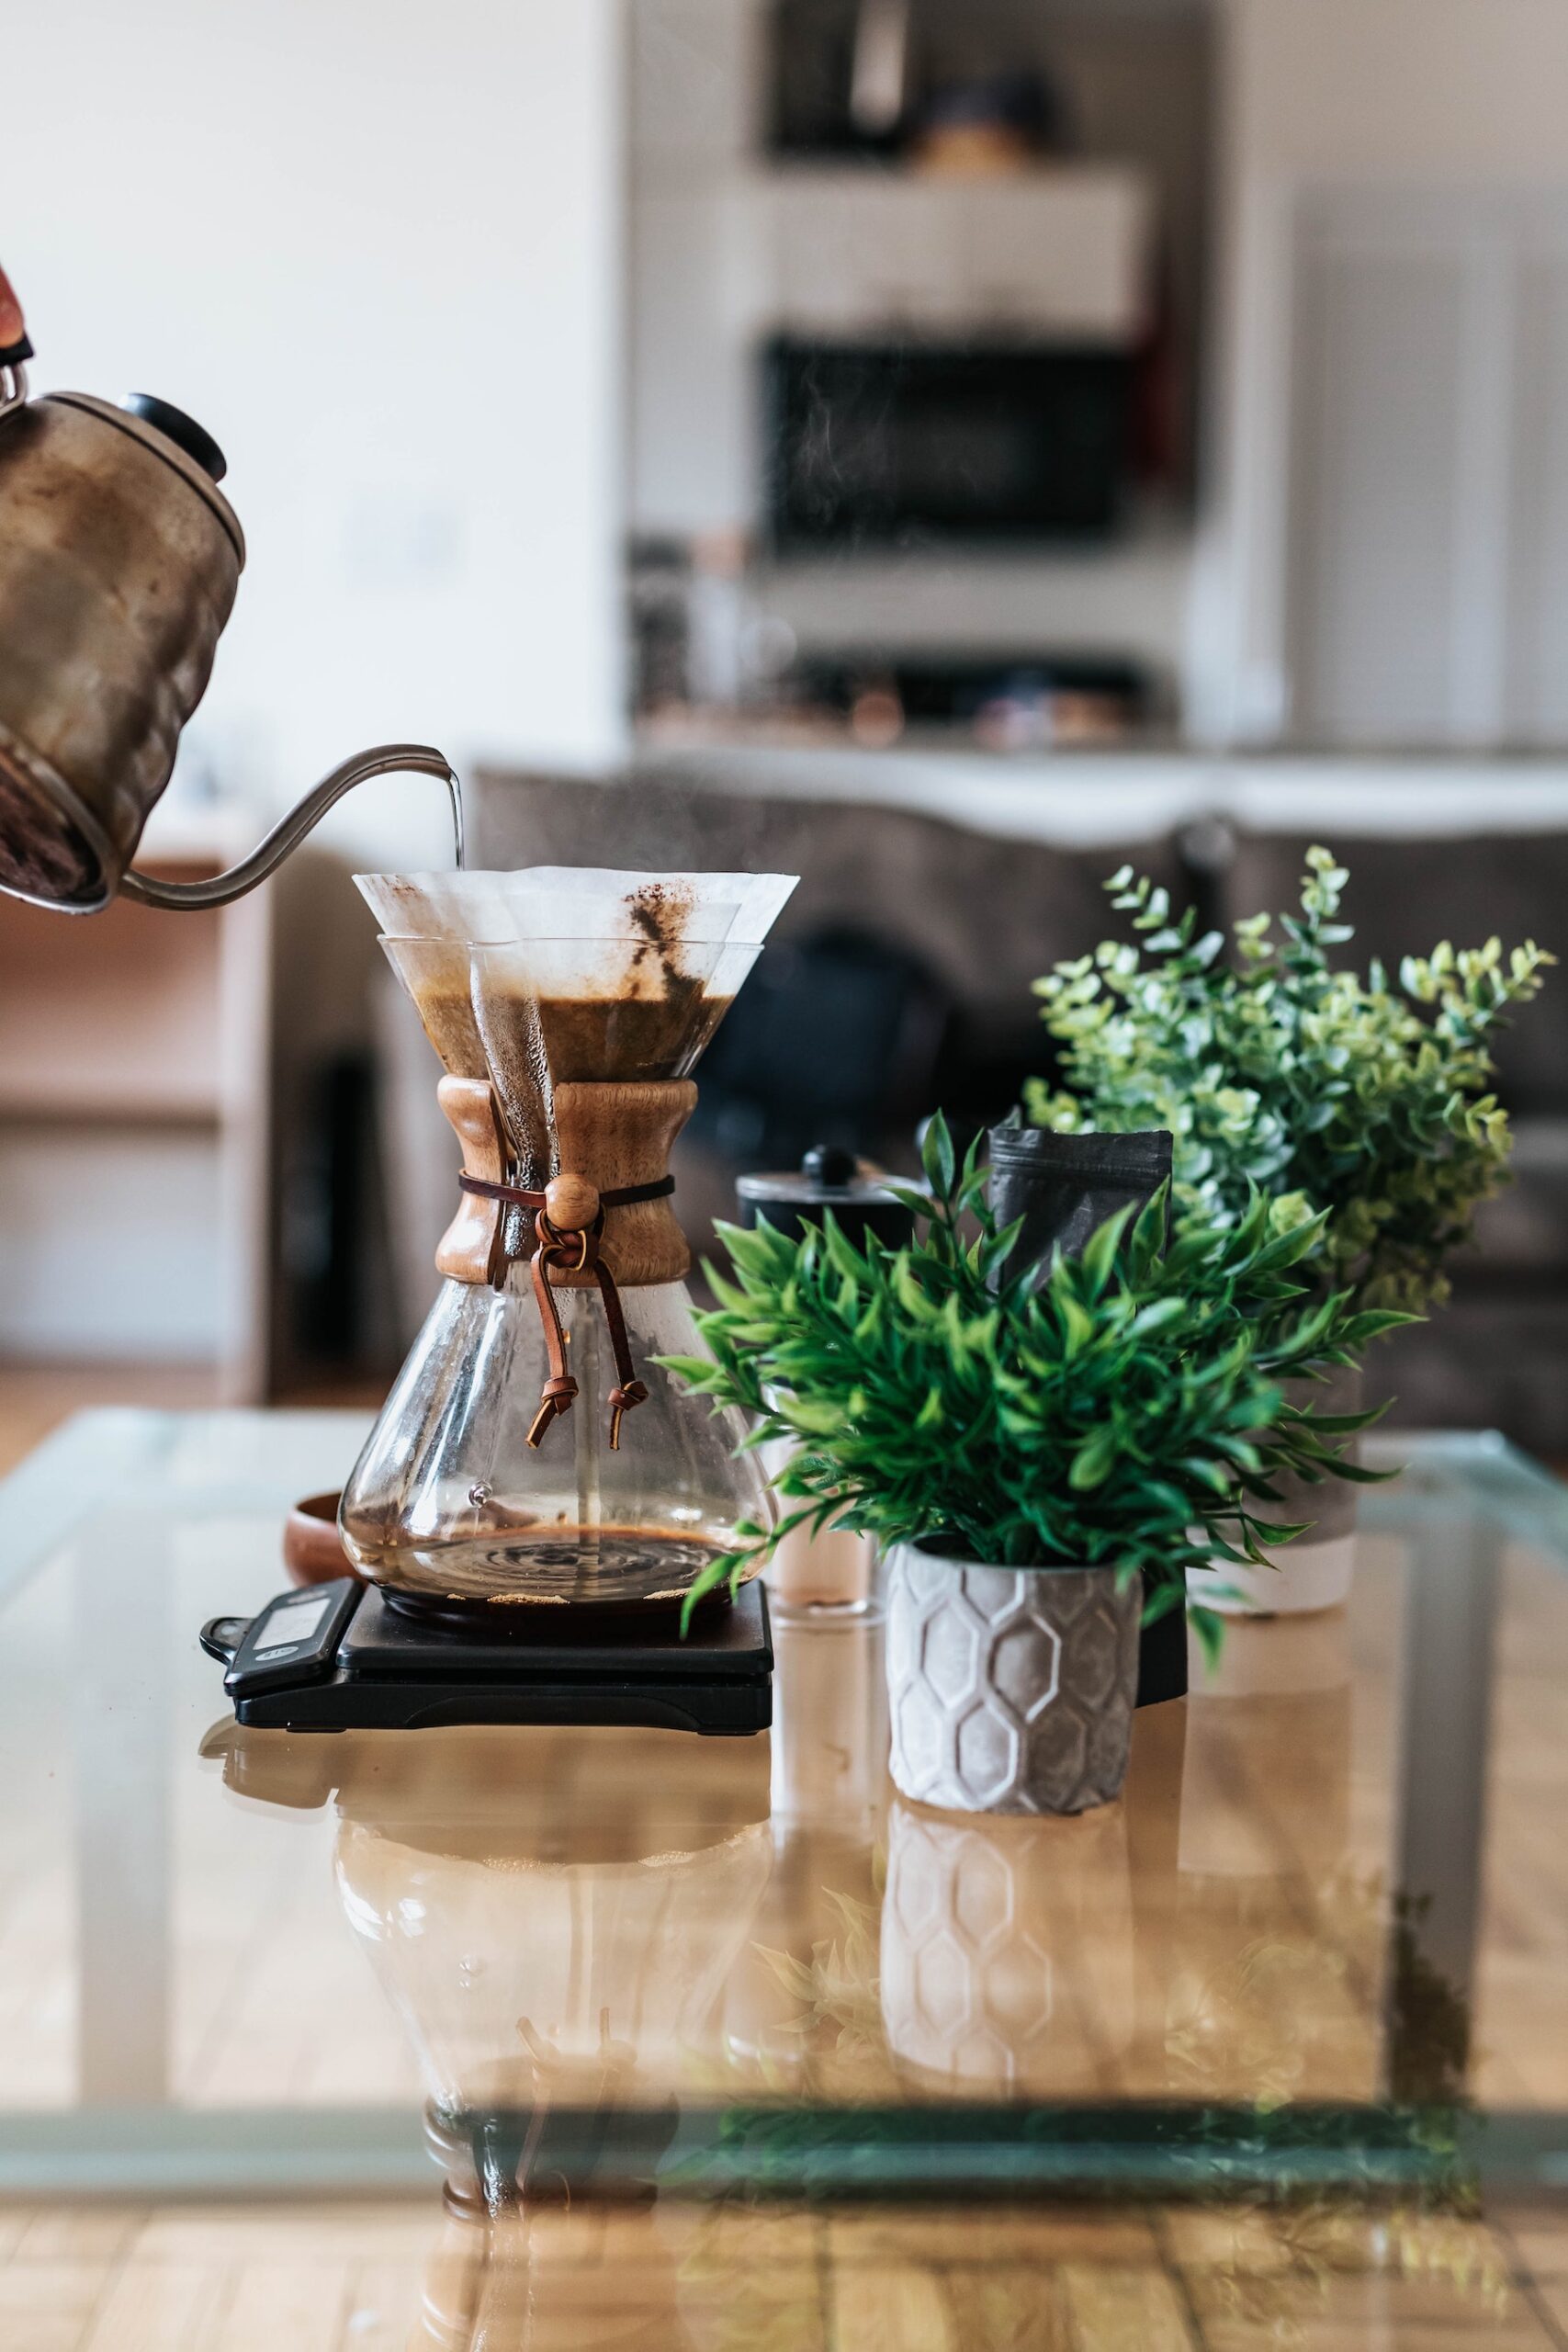 filter coffee maker and green plants displayed on a table